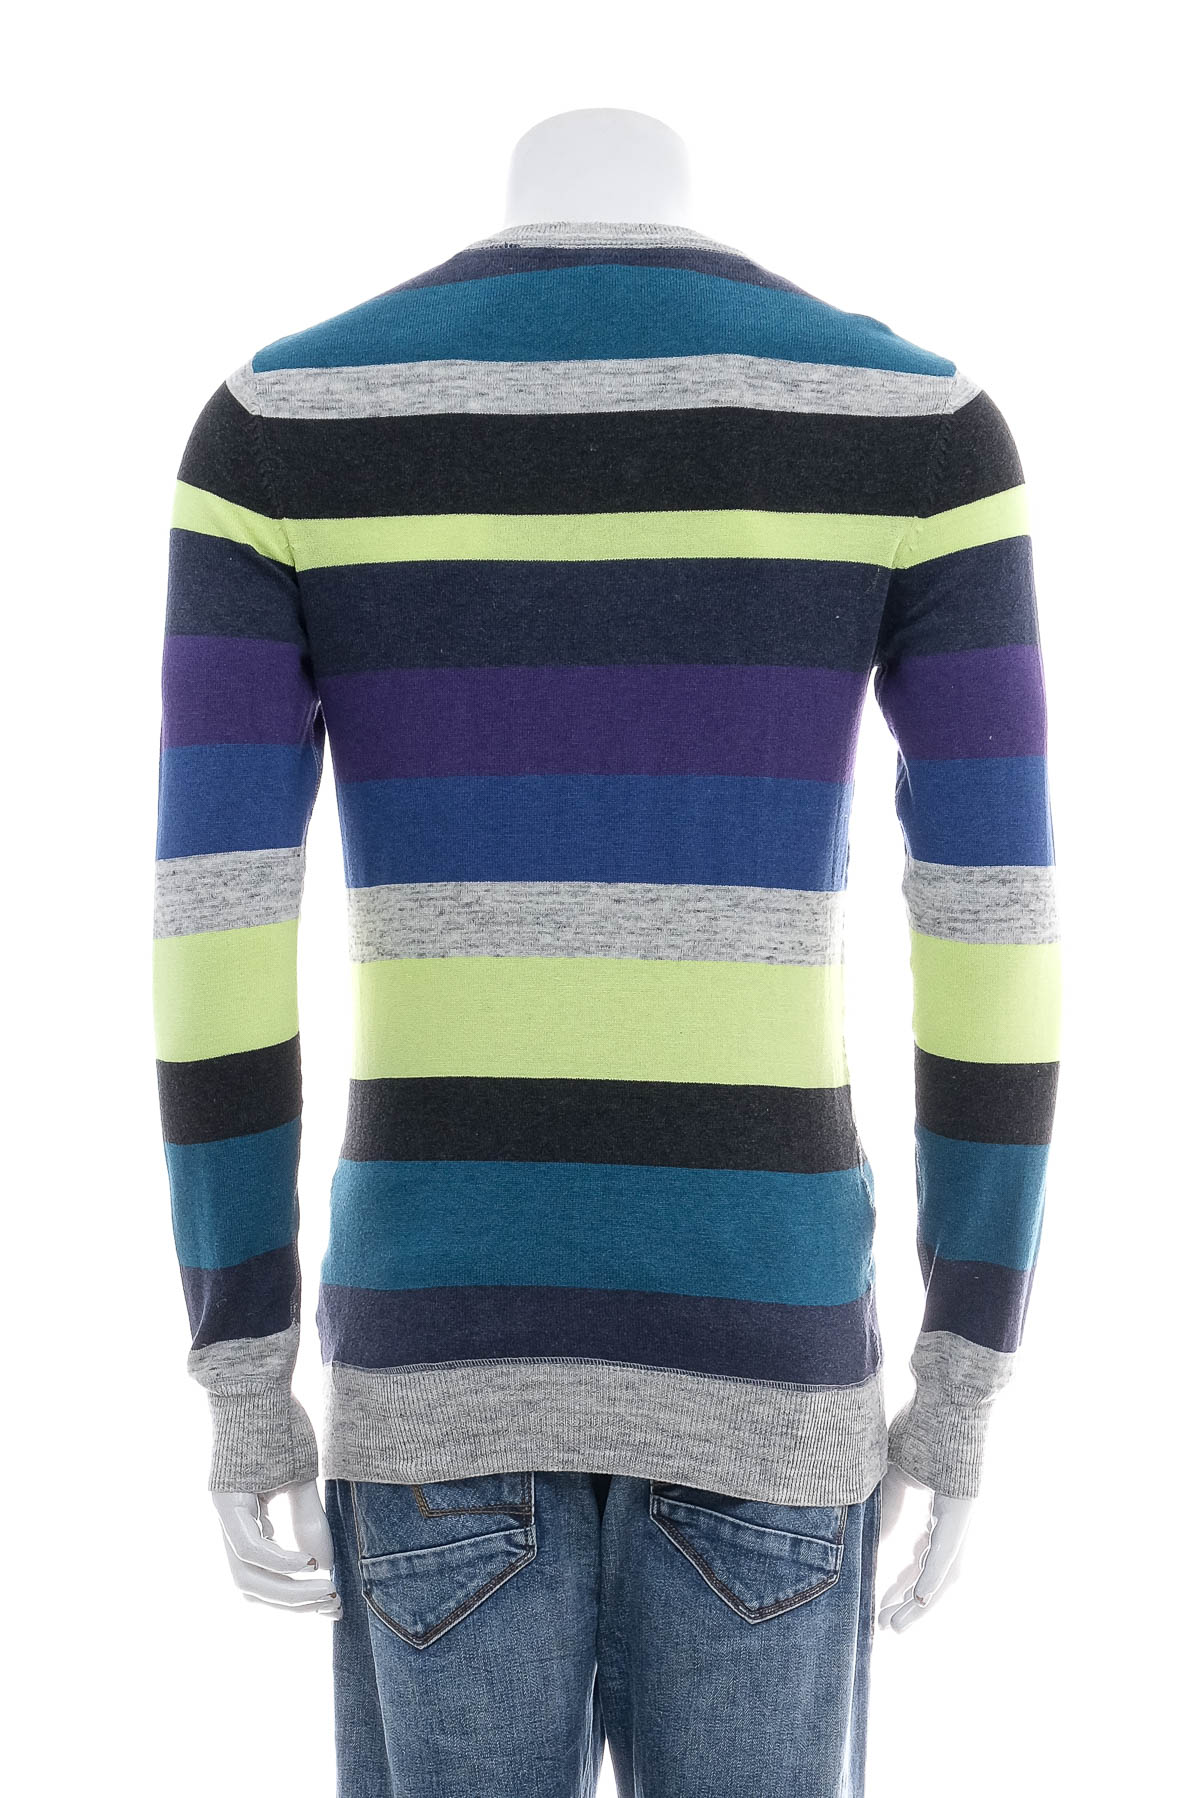 Men's sweater - DIVIDED - 1